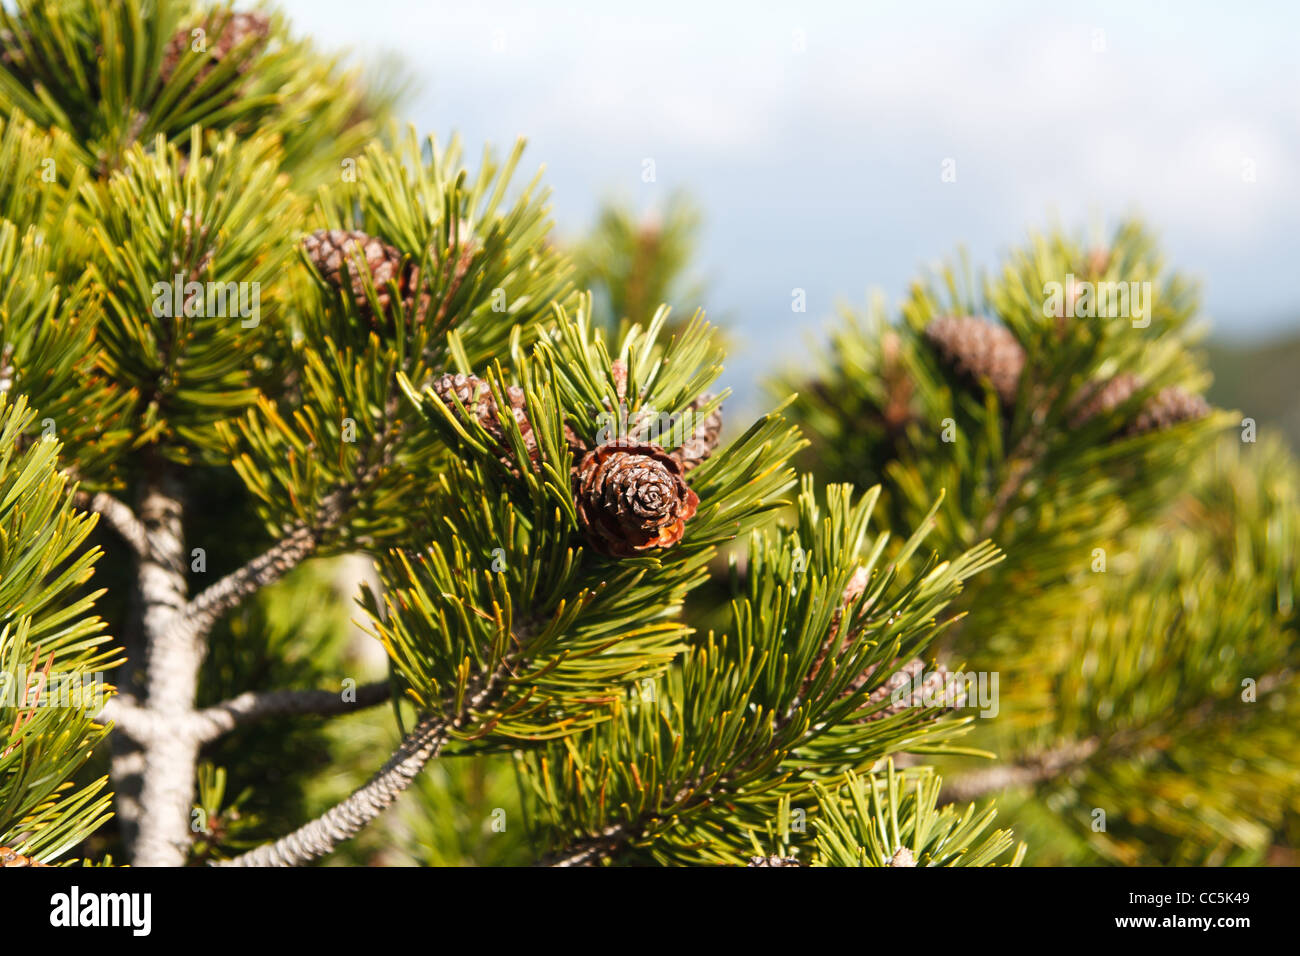 Close up of dwarf mountain pine (Pinus mugo) branches with cones. Stock Photo